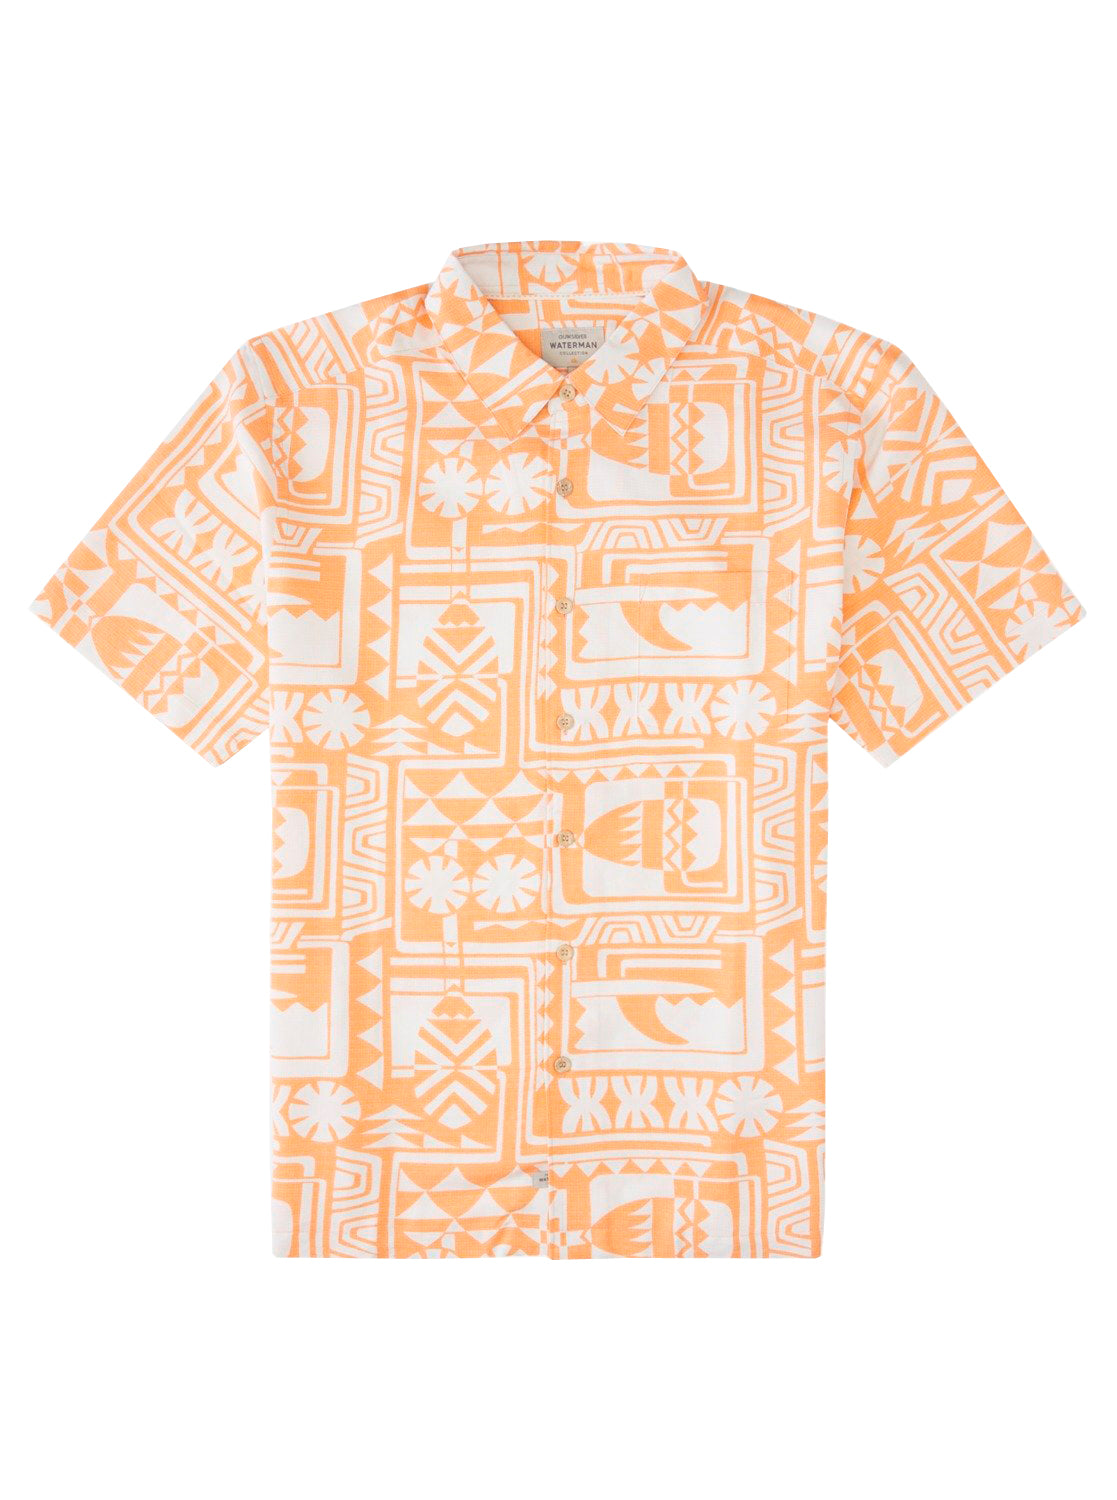 Quiksilver Waterman Dogpatch Vibes Woven